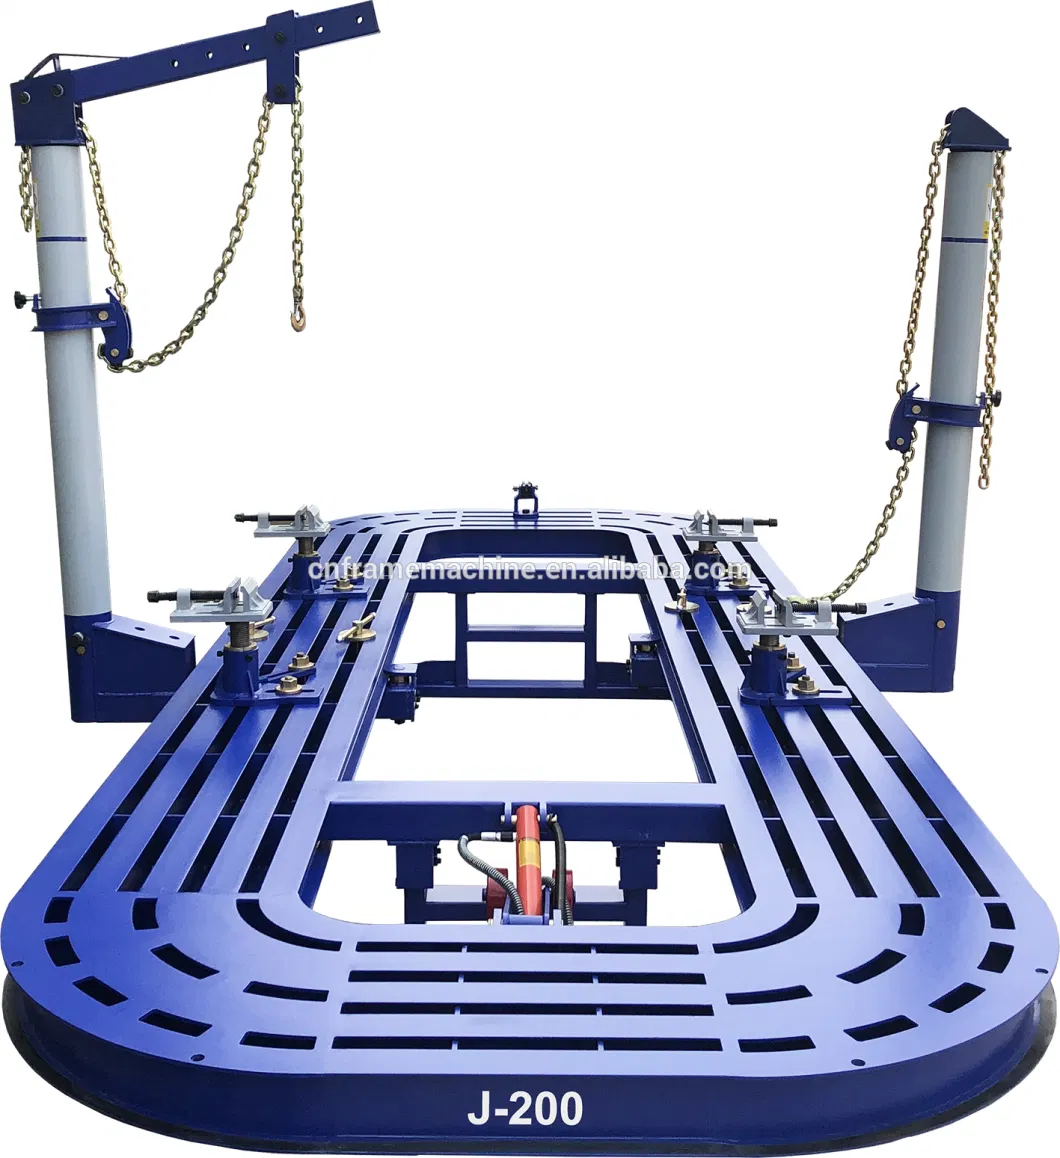 New Design Car Chassis Straightening Bench Car Frame Machine